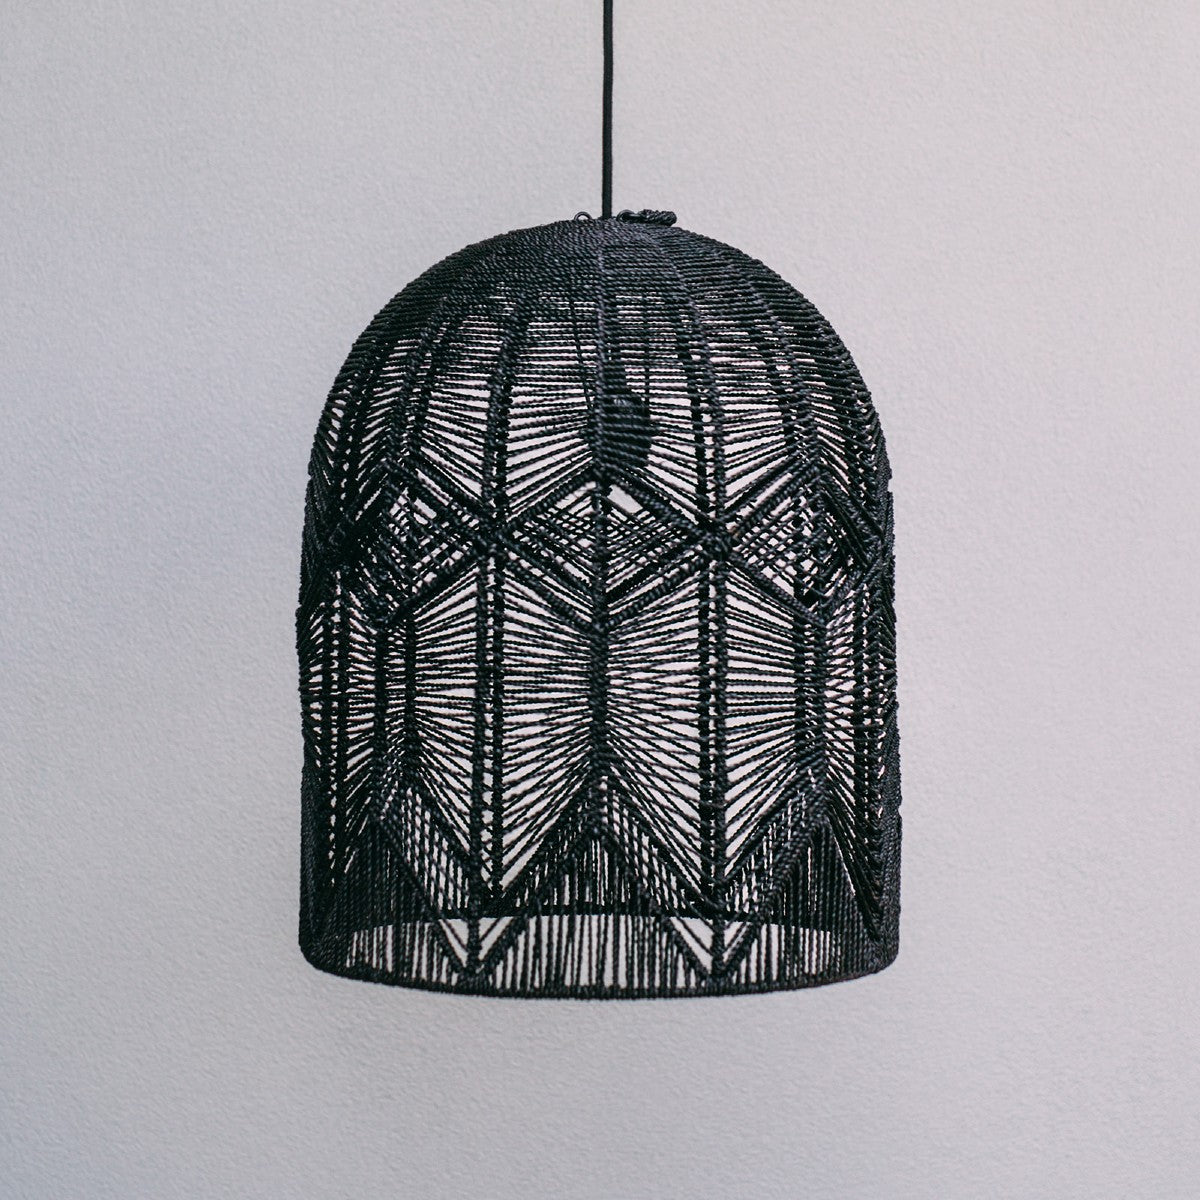 seagrass pendant light, photo on a plain grey background enables you to see the beautiful pattern in the weave.